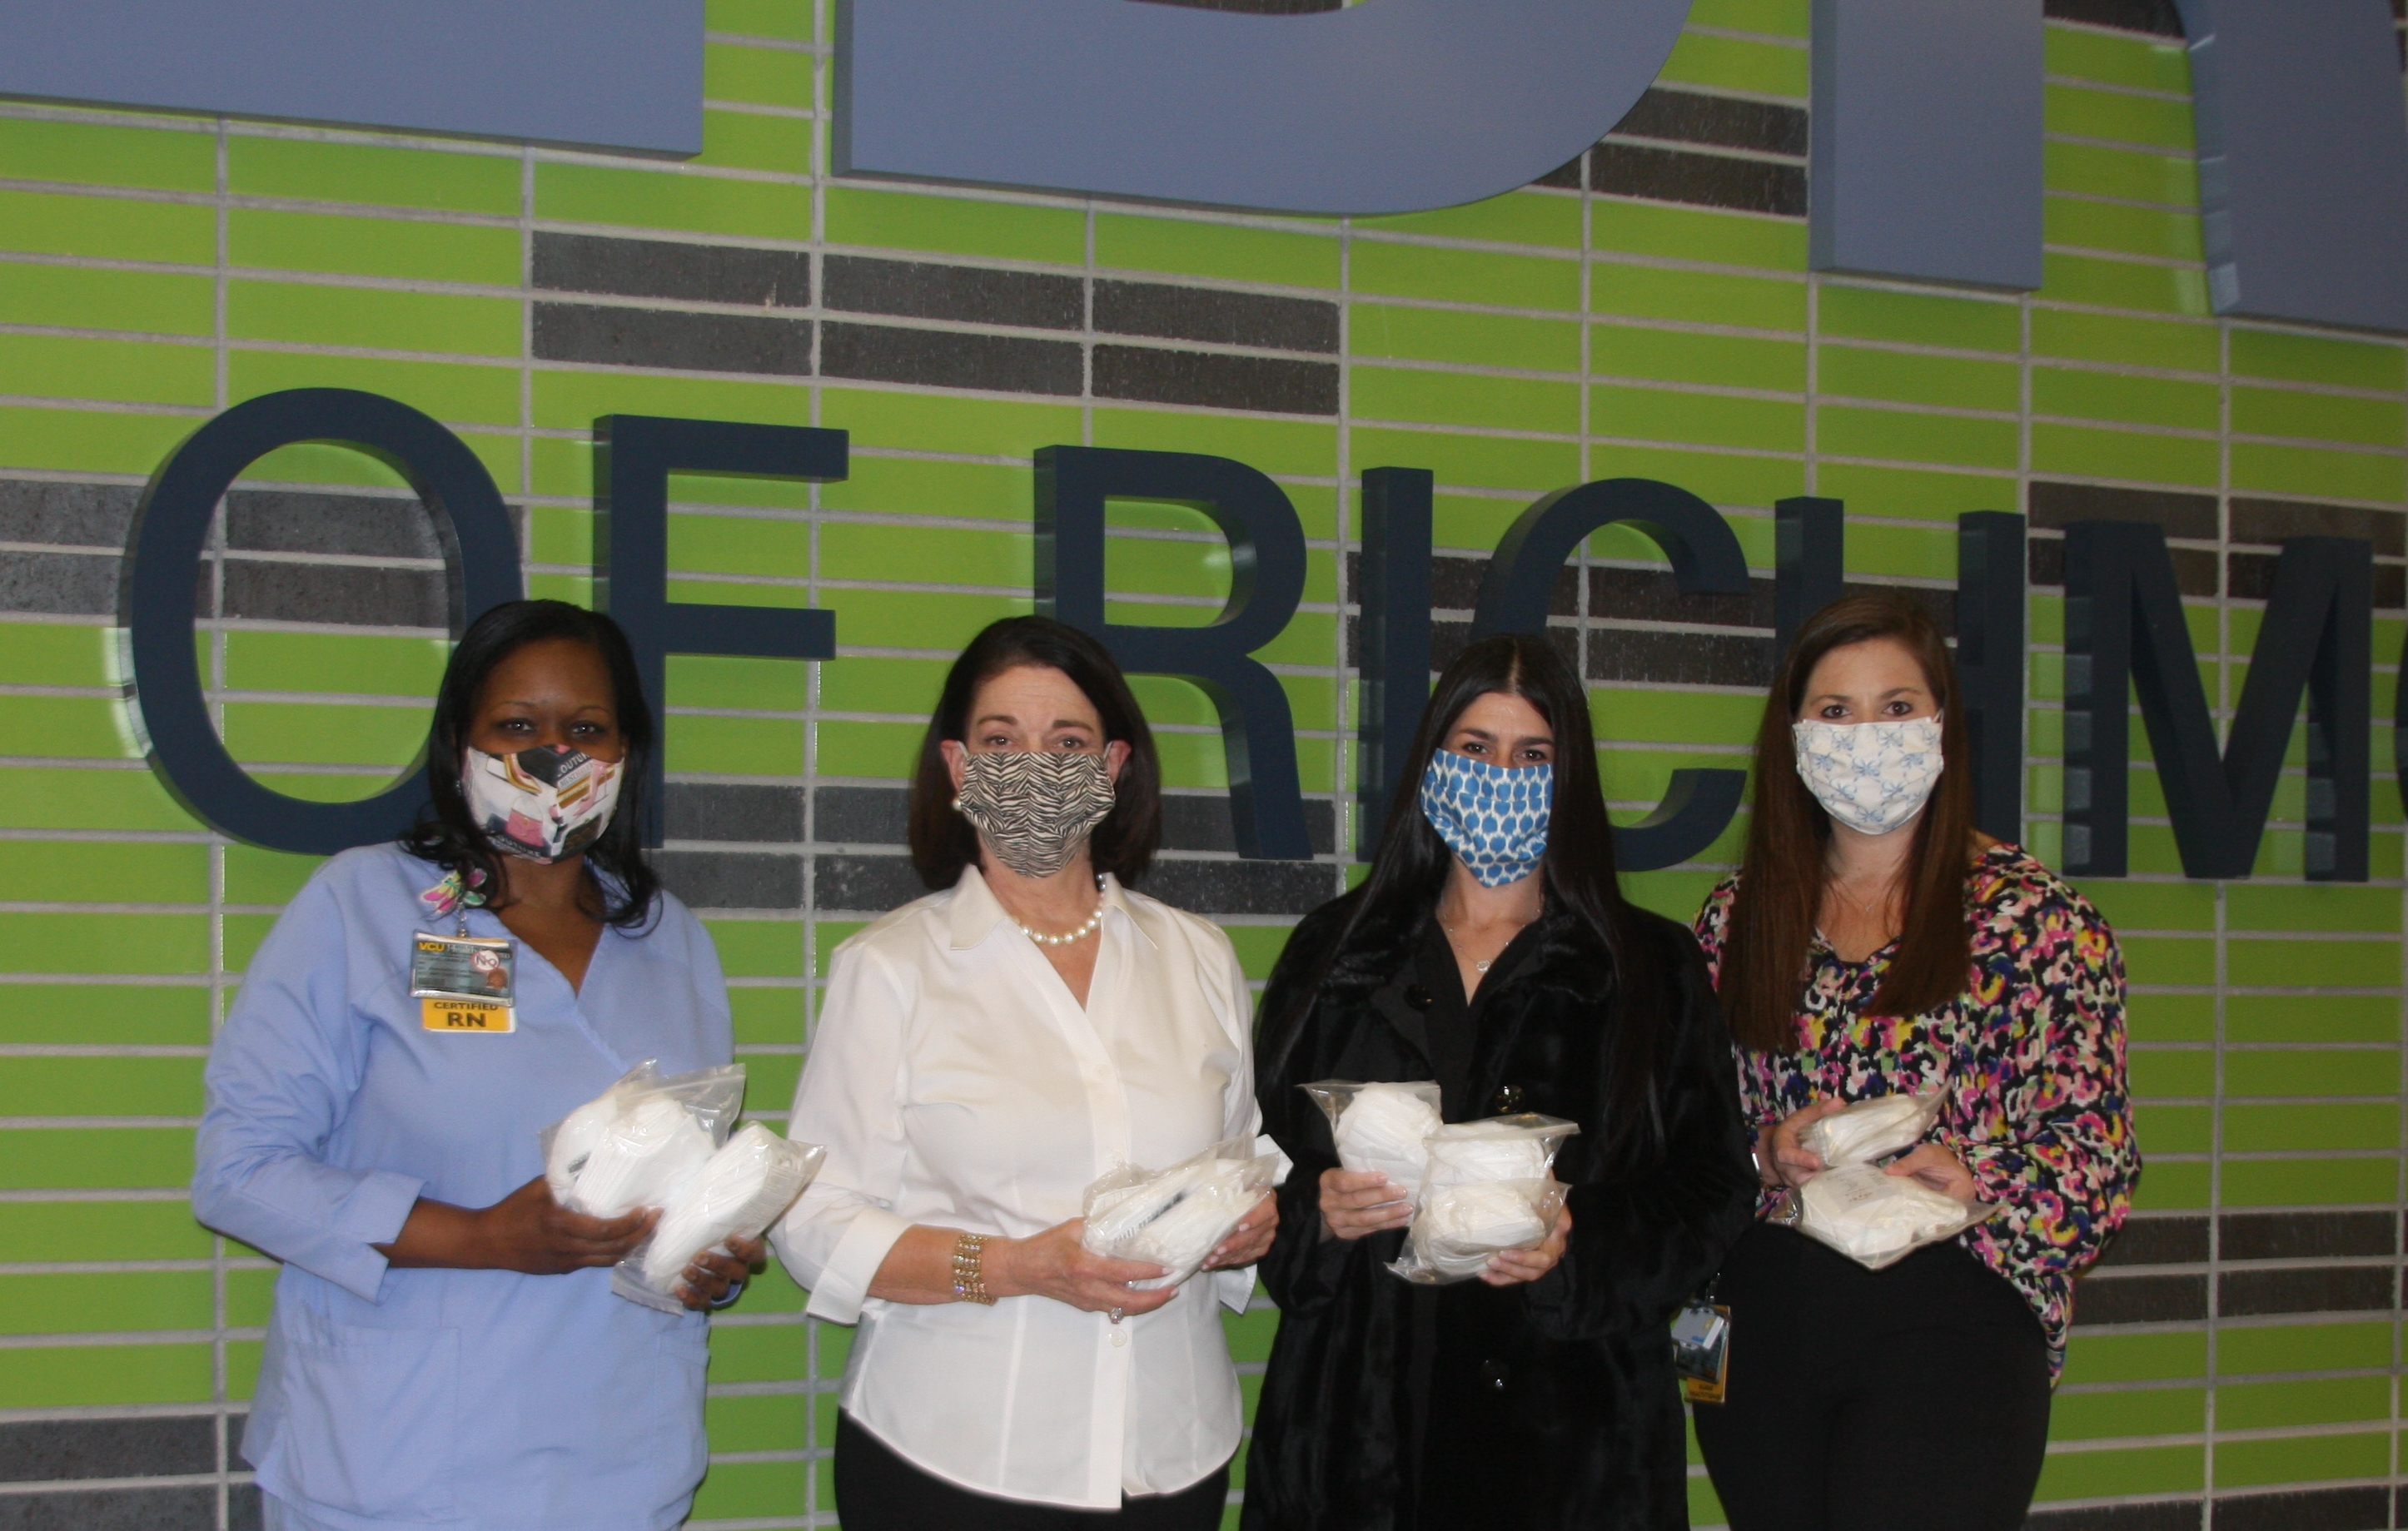 Two Richmond women unite to donate 500 masks to area healthcare workers